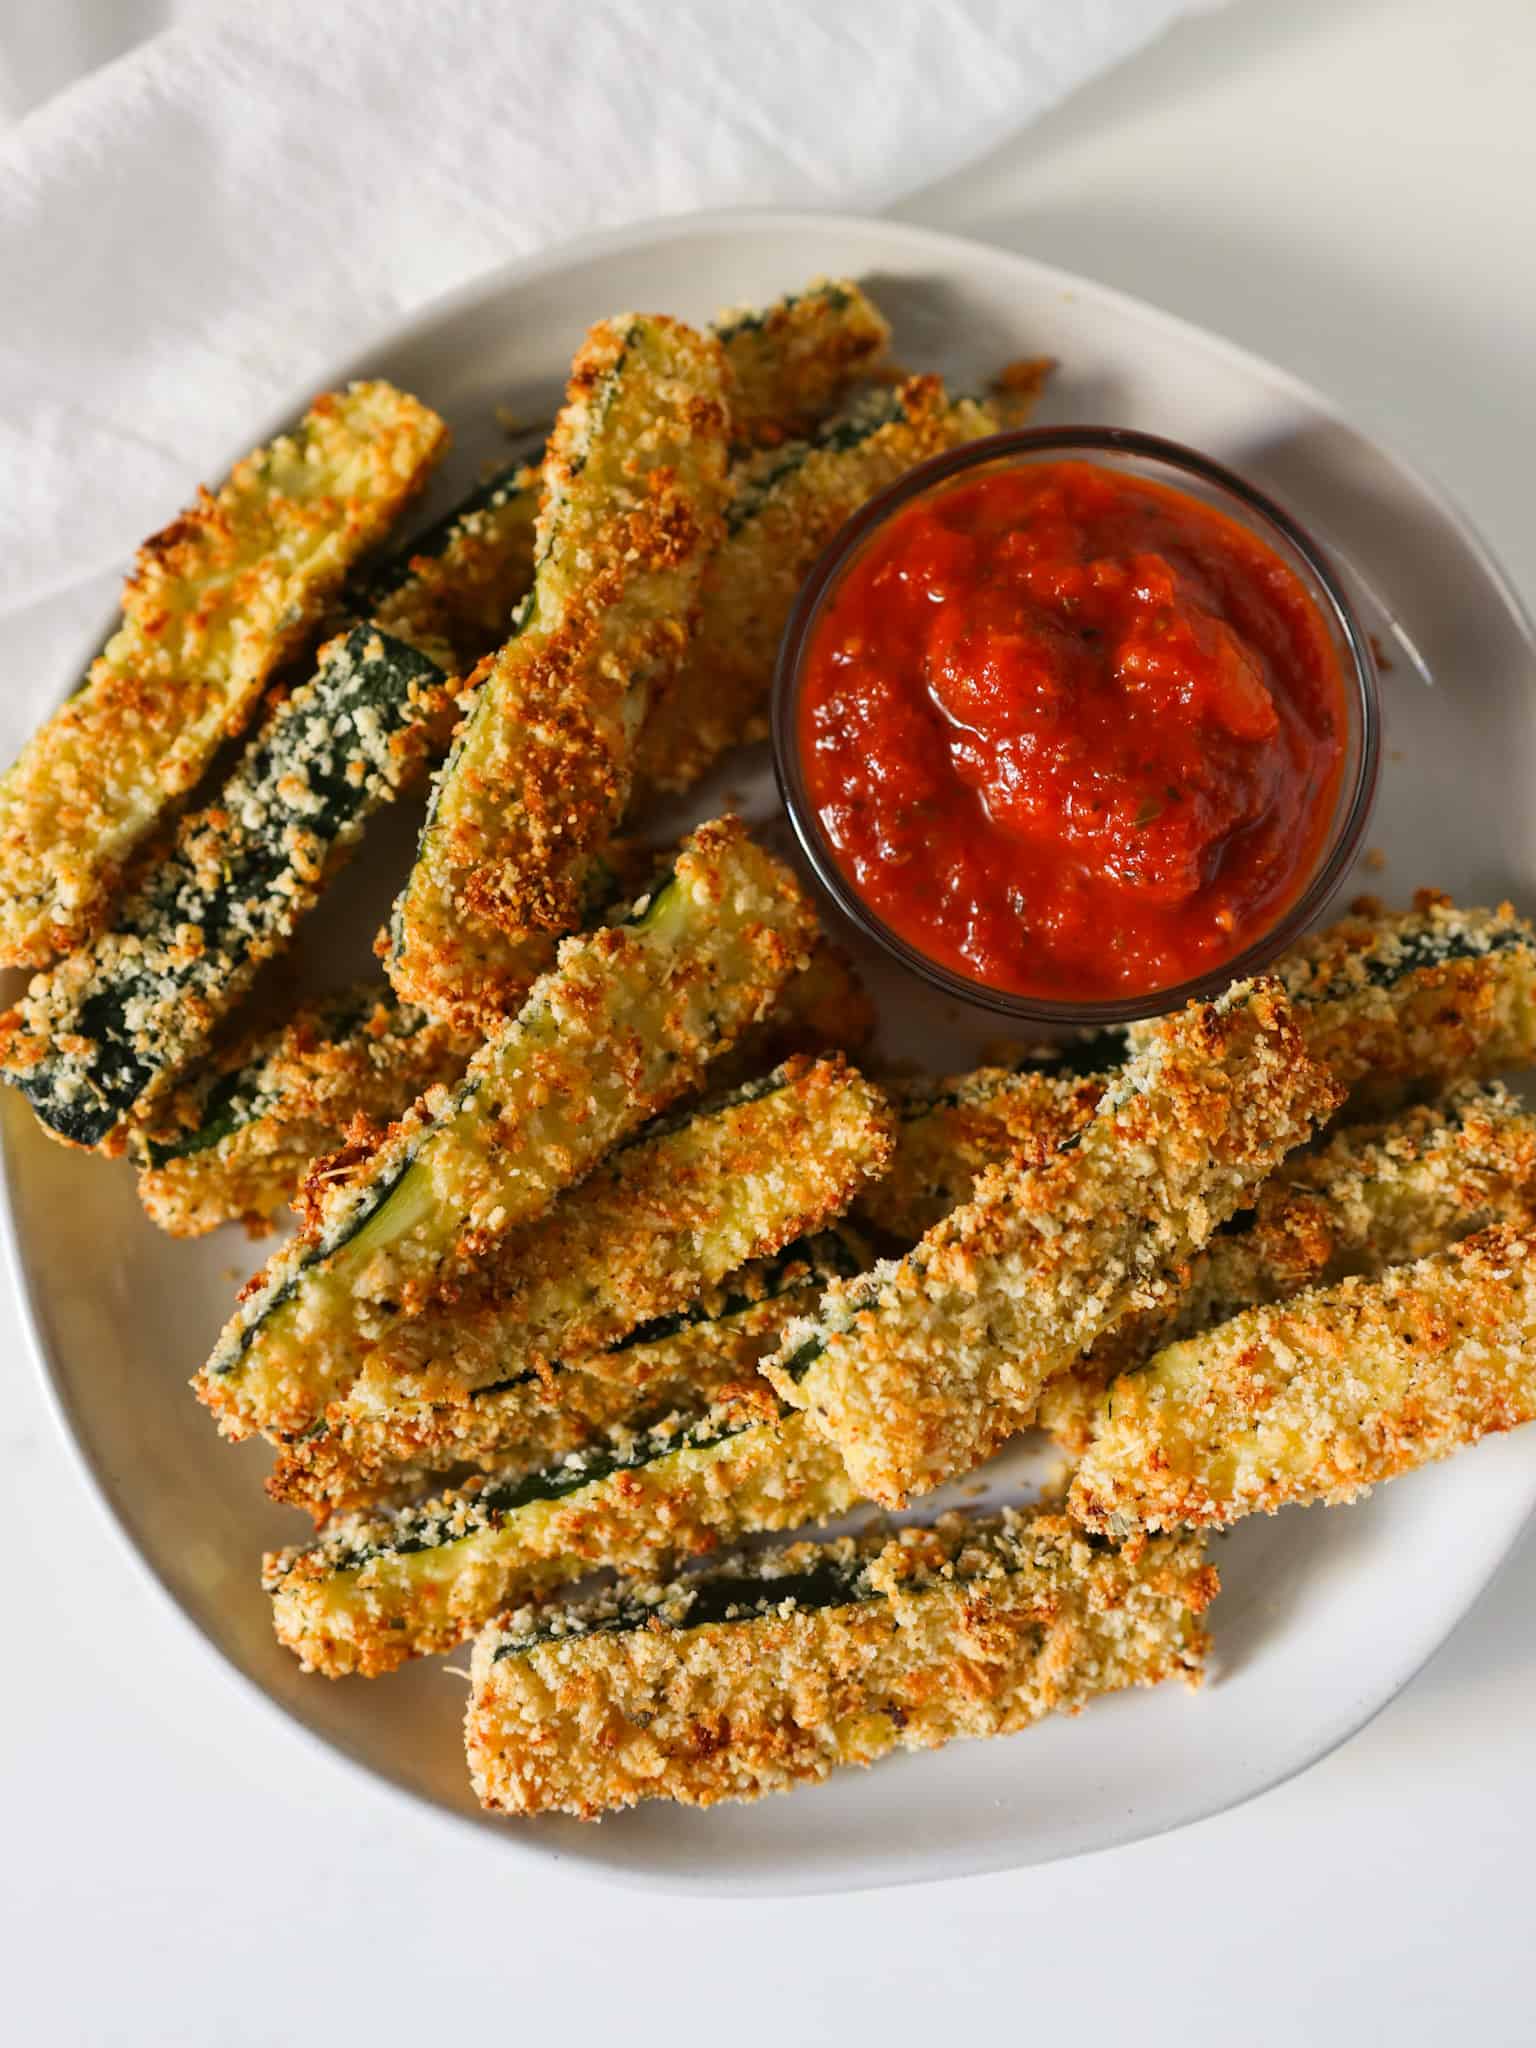 Baked Zucchini Fries with marinara dipping sauce.